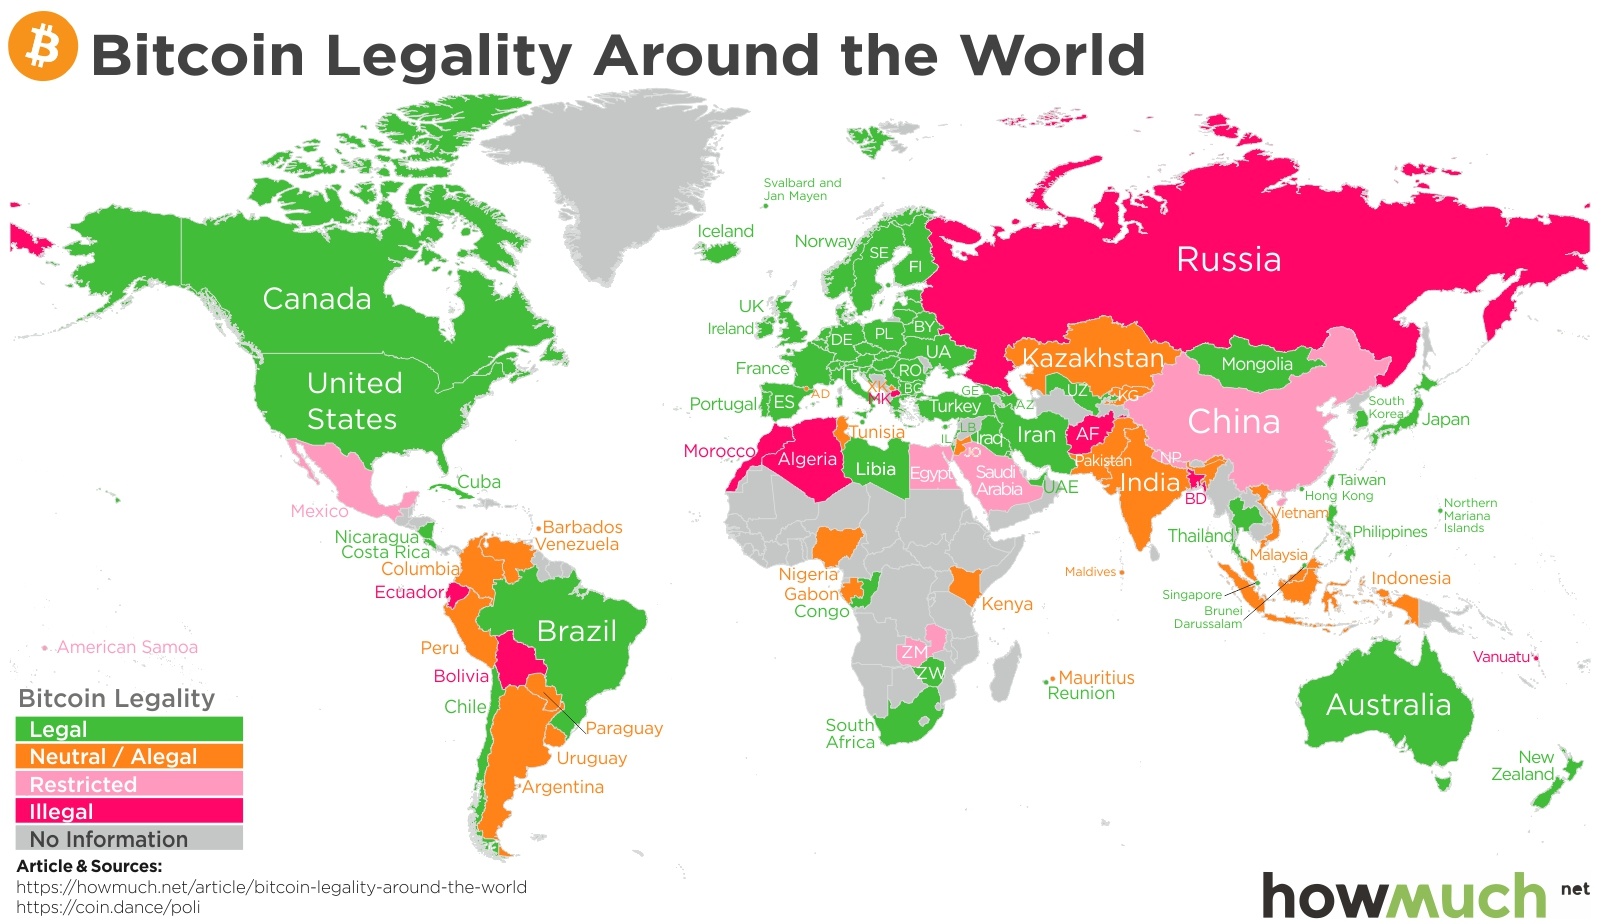 15 Countries Where Bitcoin is Legal and Illegal